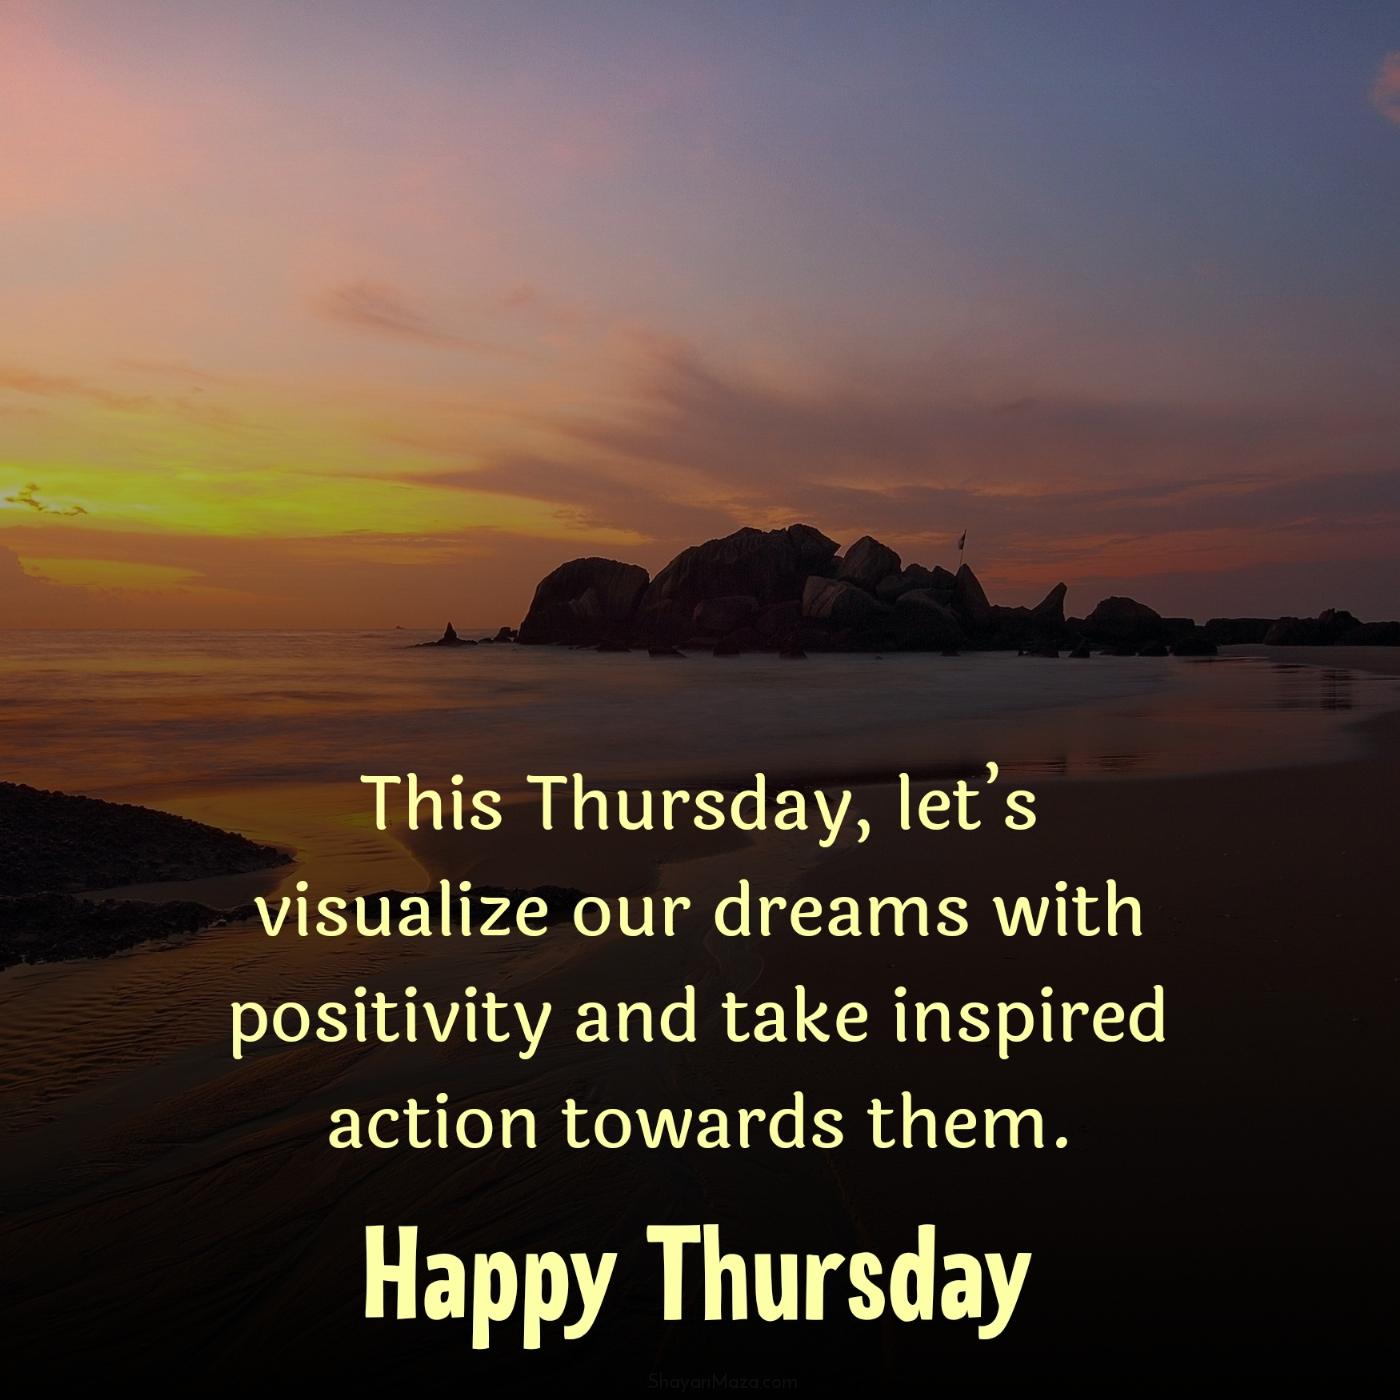 This Thursday lets visualize our dreams with positivity